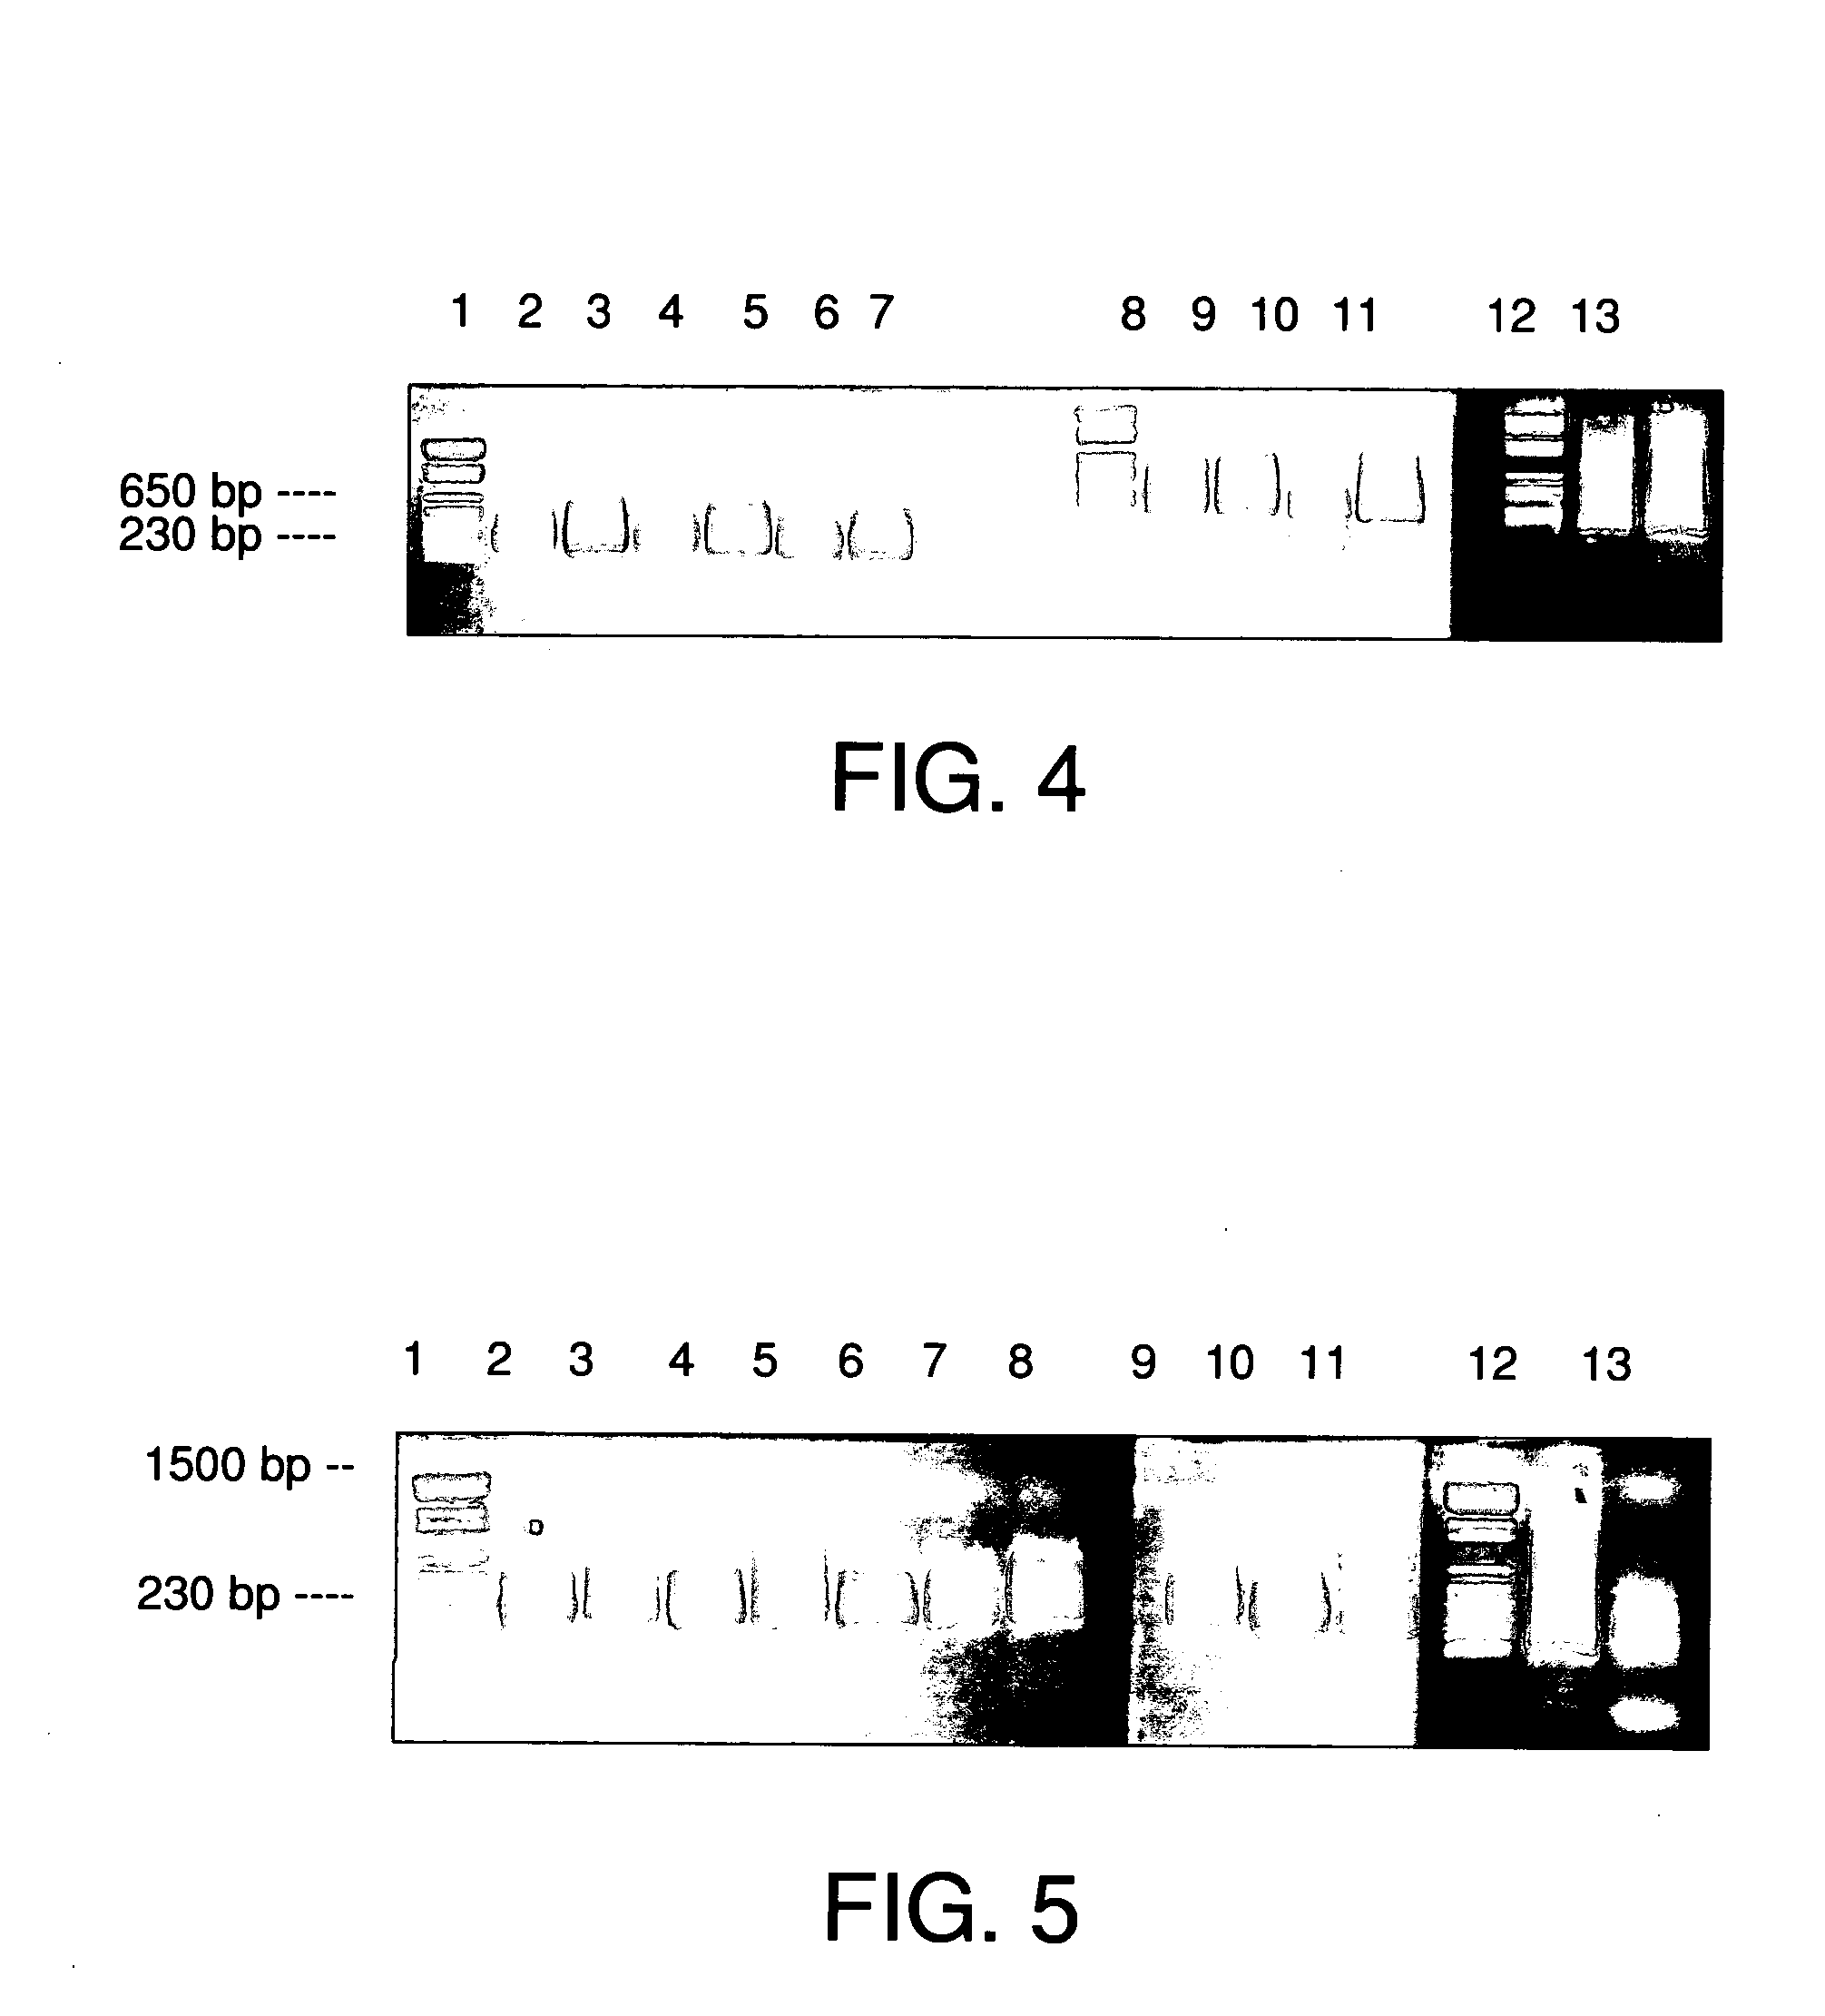 Methods of making repetitive sequences removed probes and uses thereof